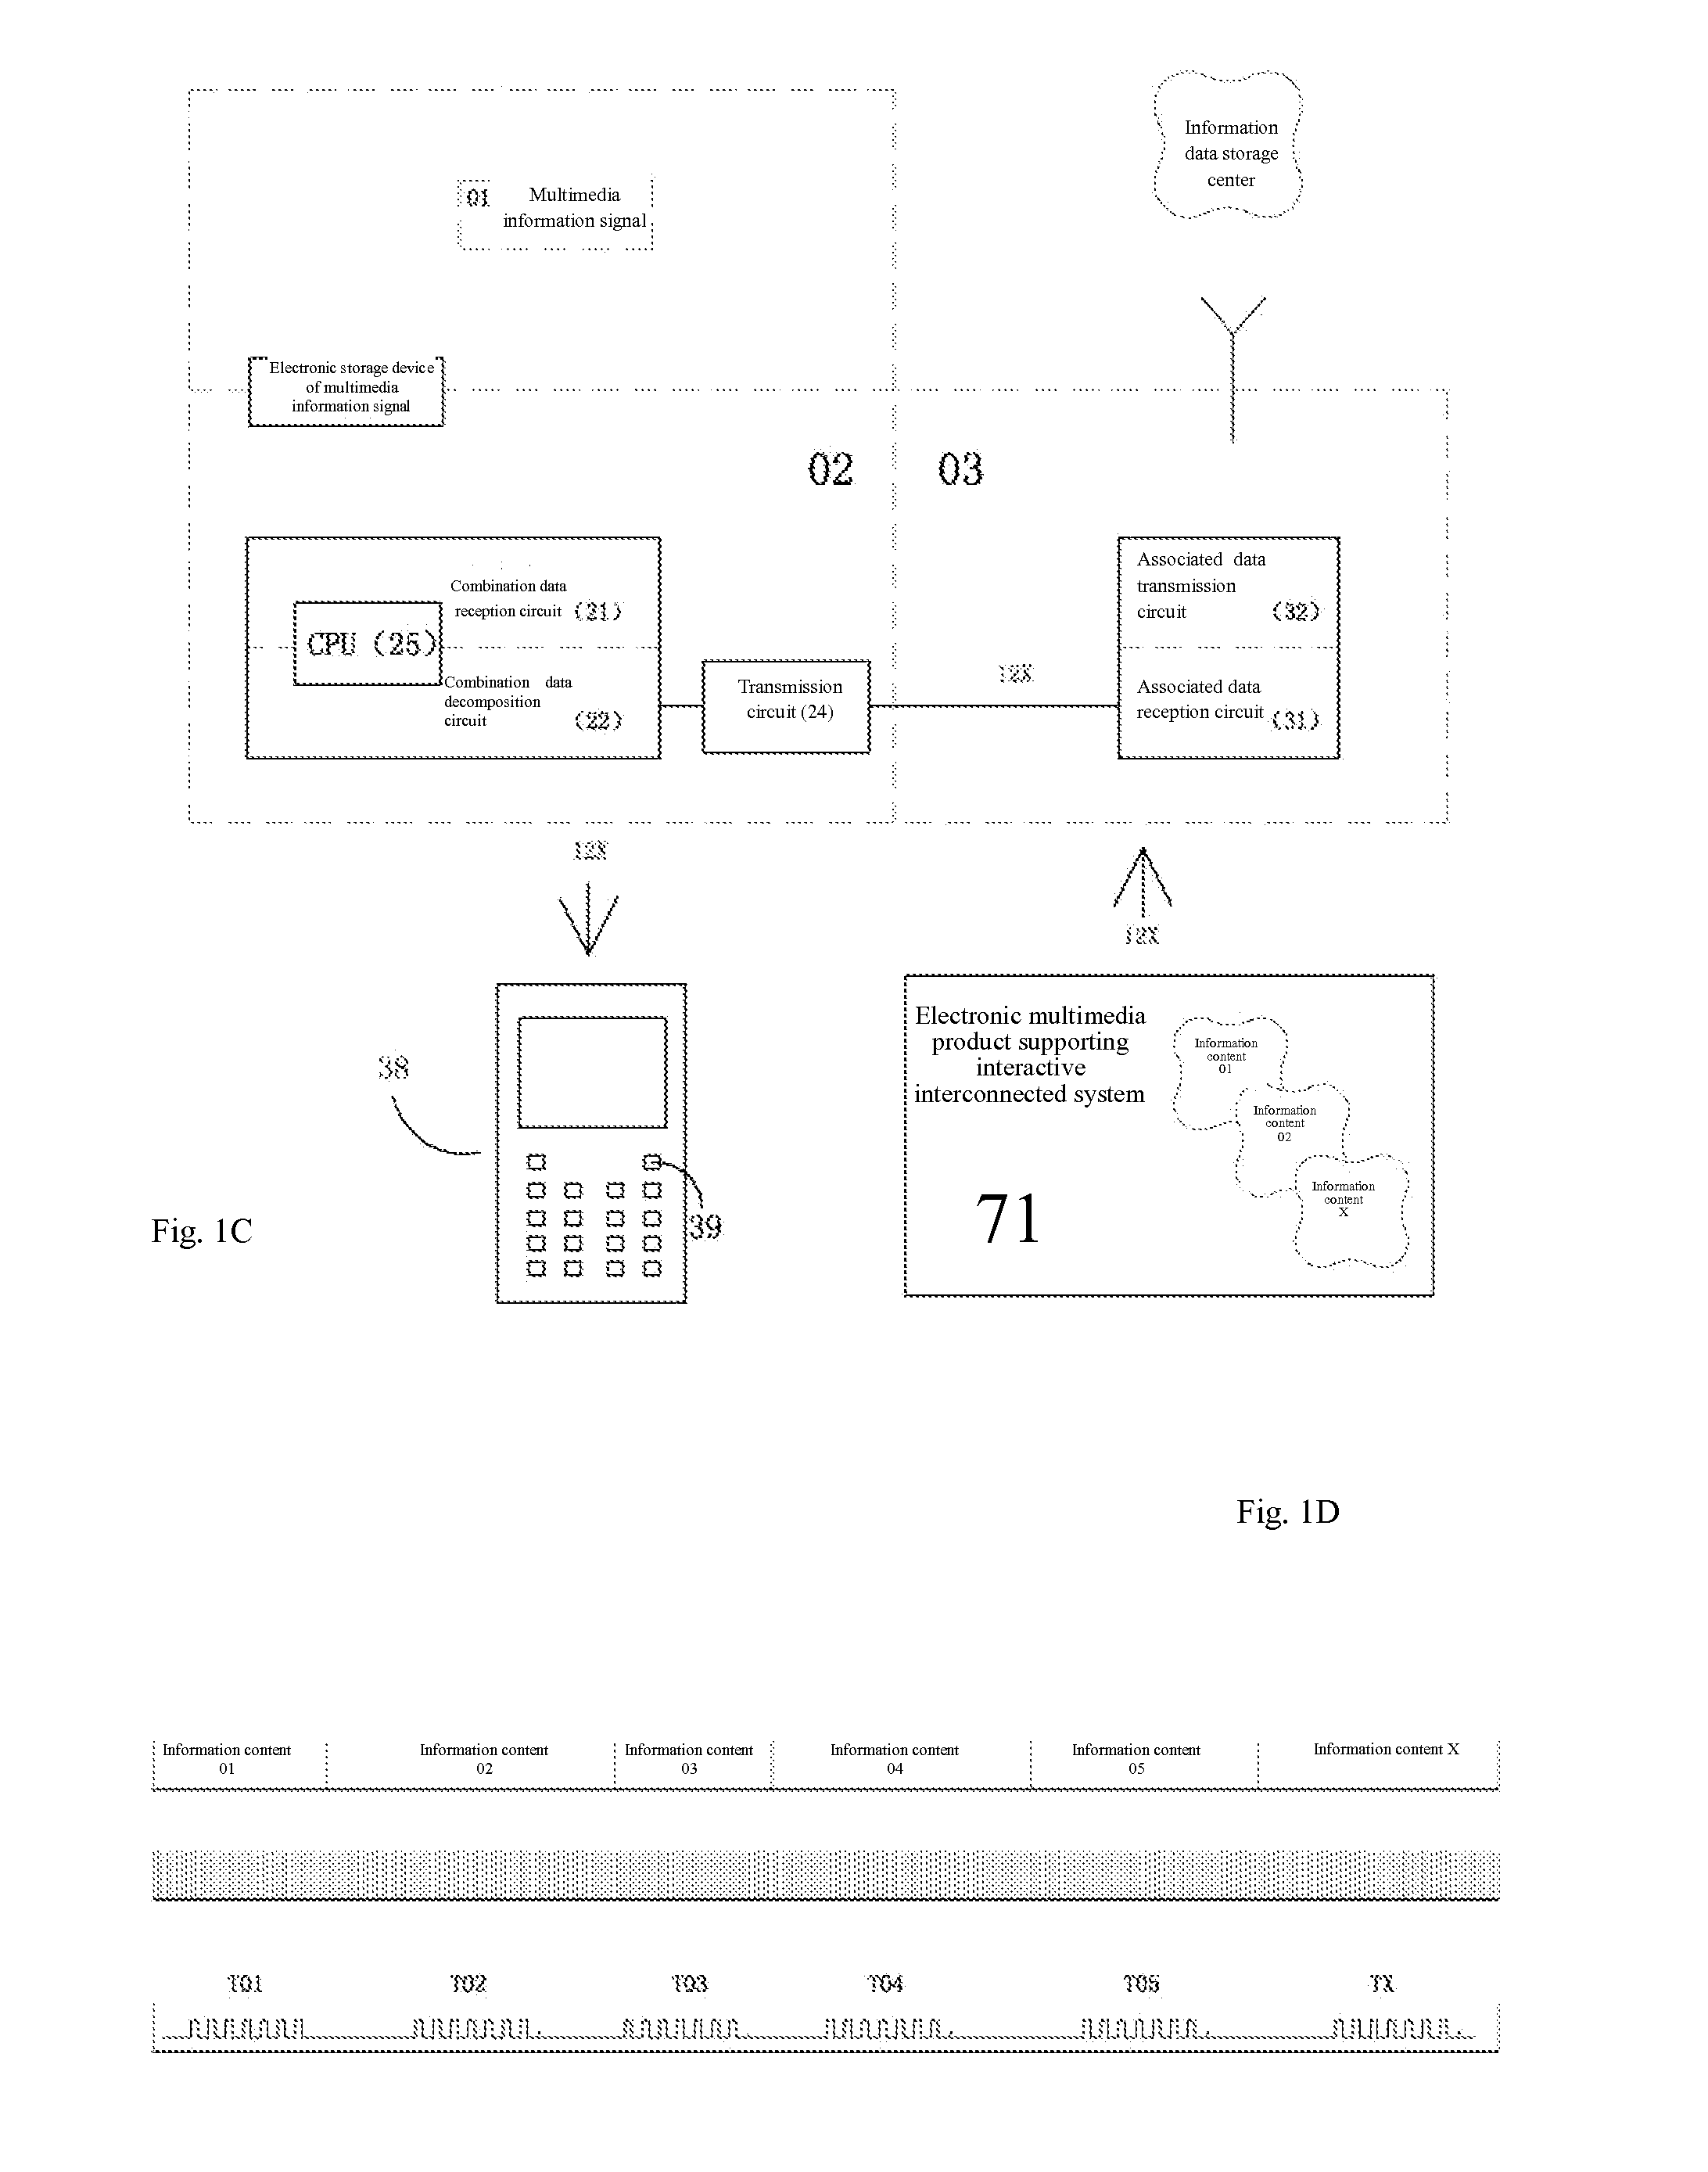 Multimedia information signal supporting interactive association system